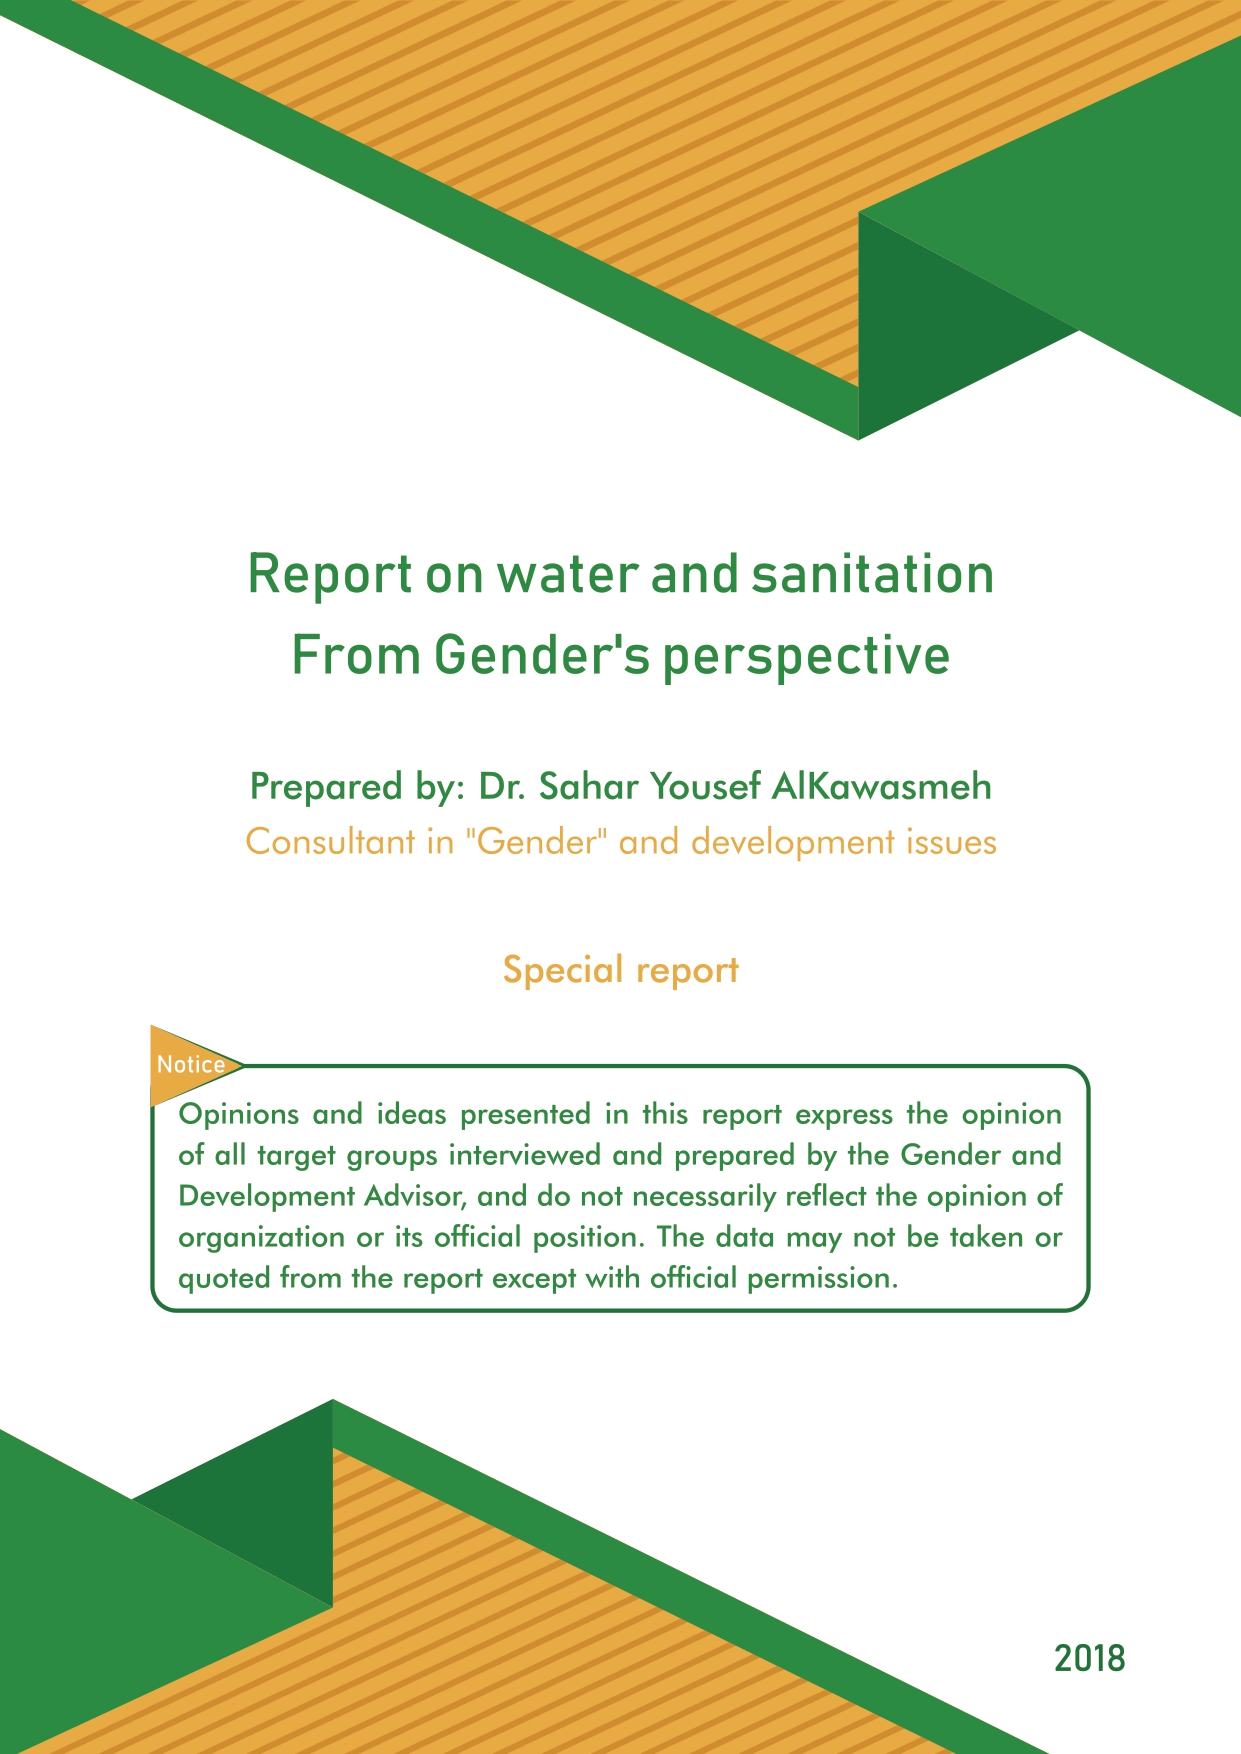  Report on water and sanitation from Gender perspective